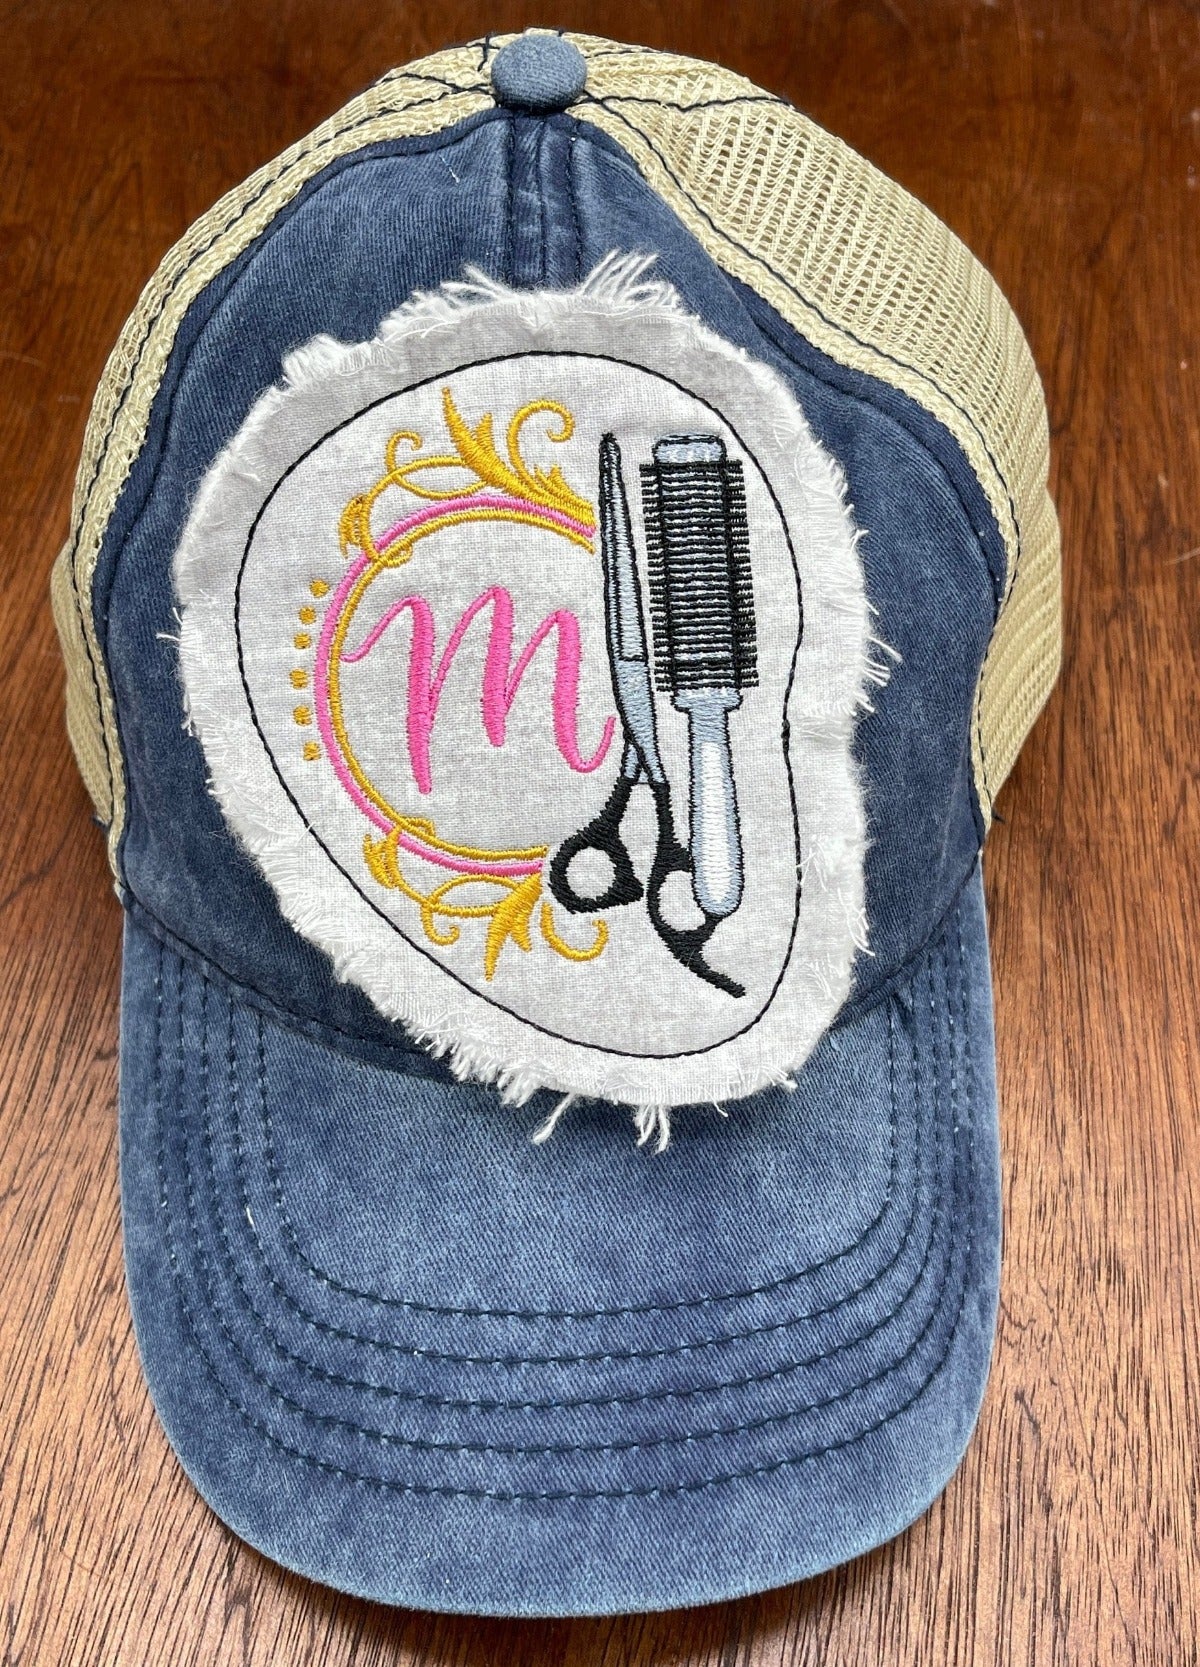 hair stylist patch on hat